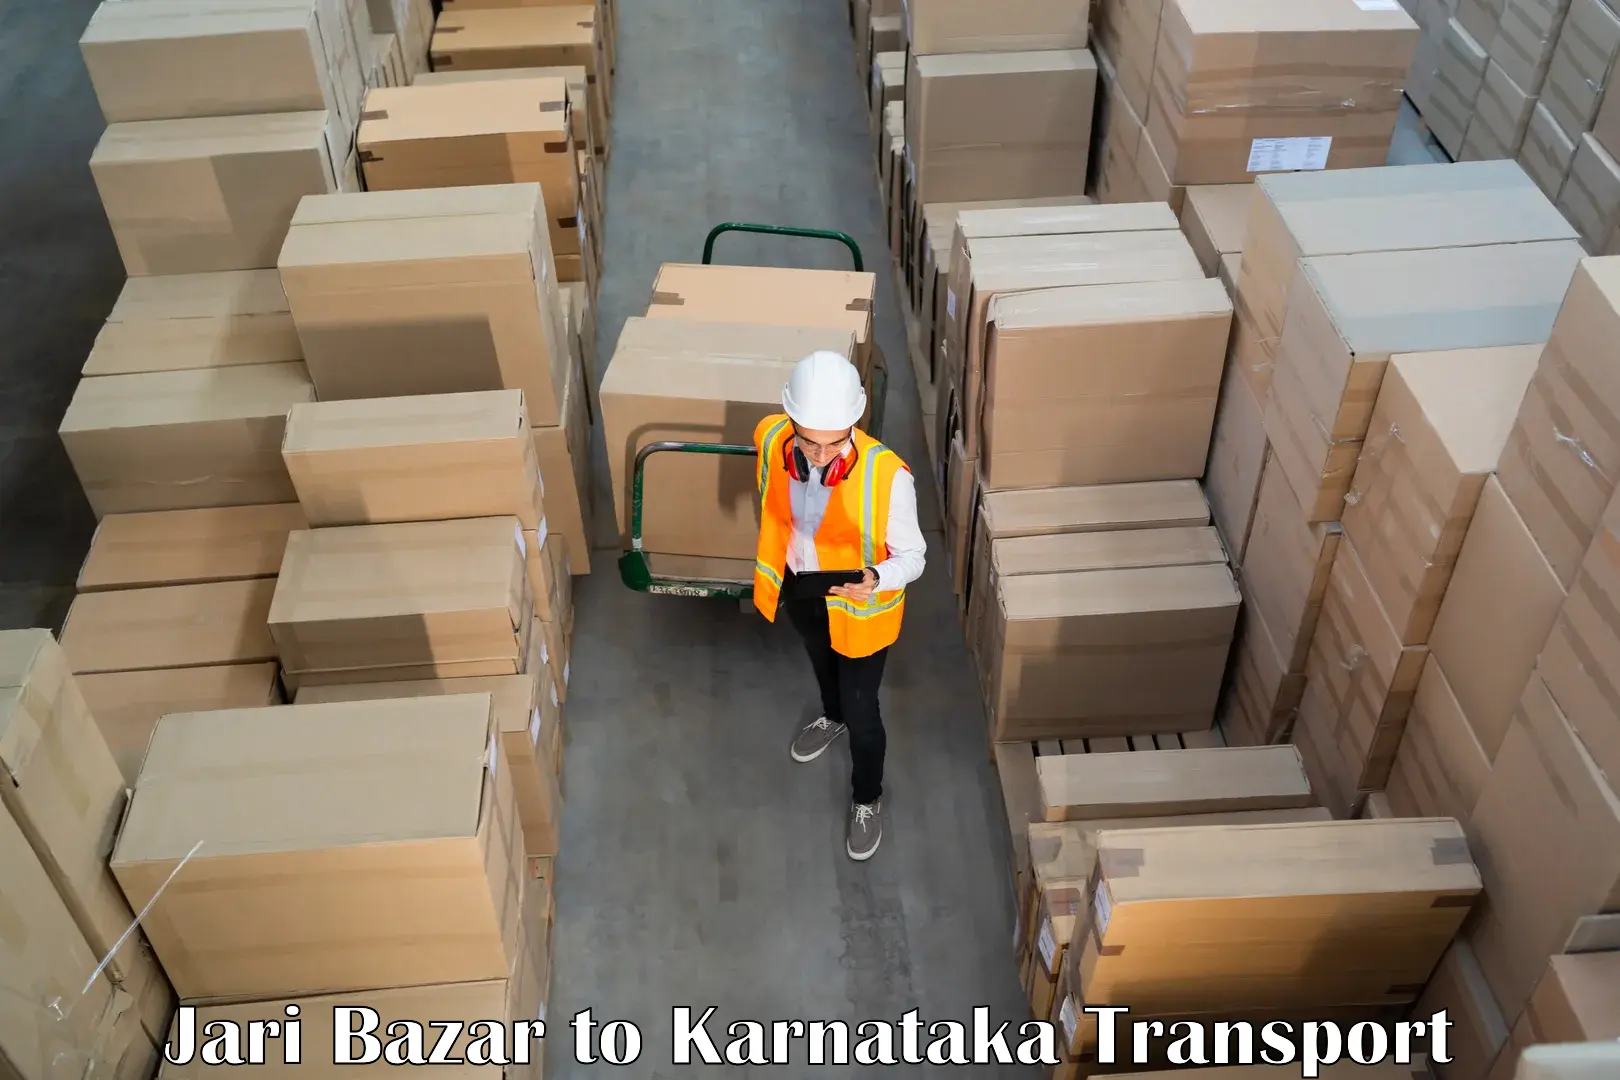 Daily transport service Jari Bazar to Chikmagalur